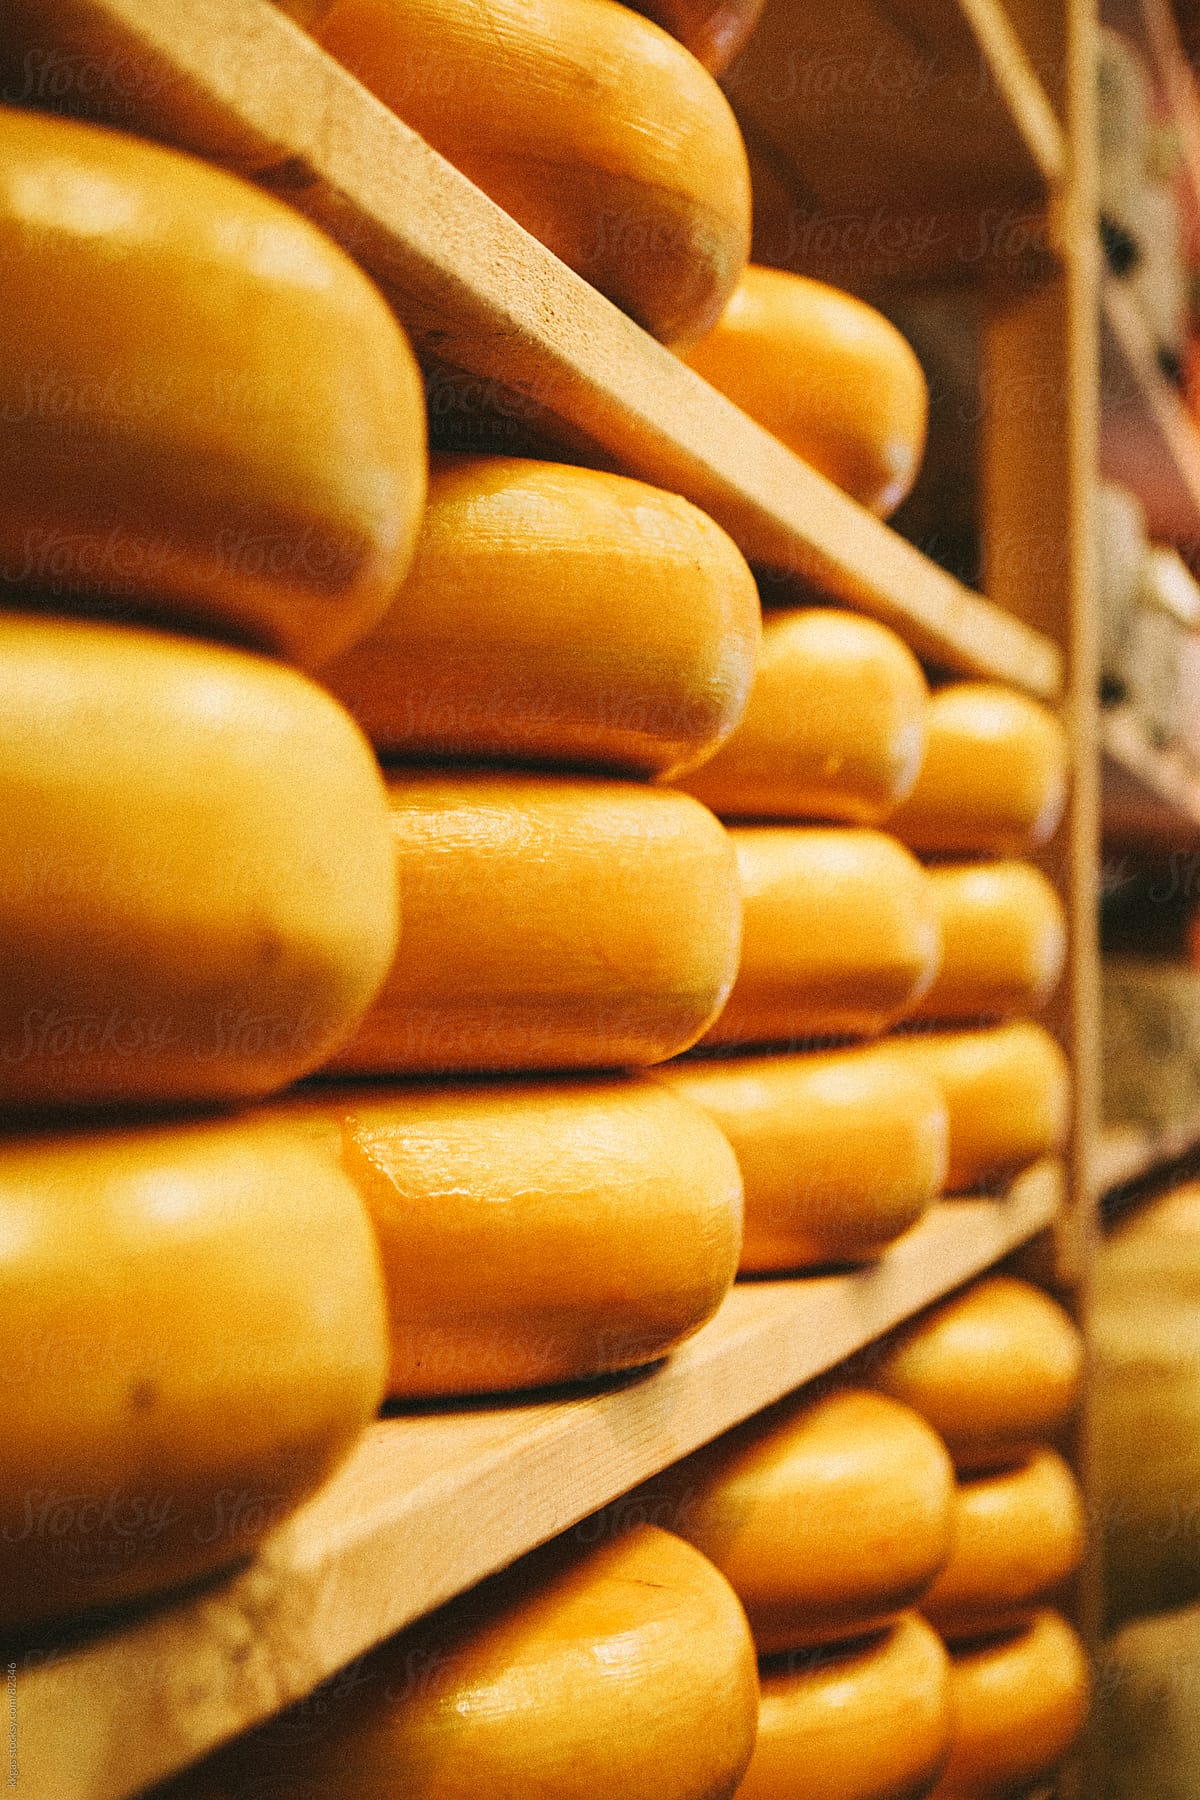 Cheeses stacked on a shelf in a dairy.